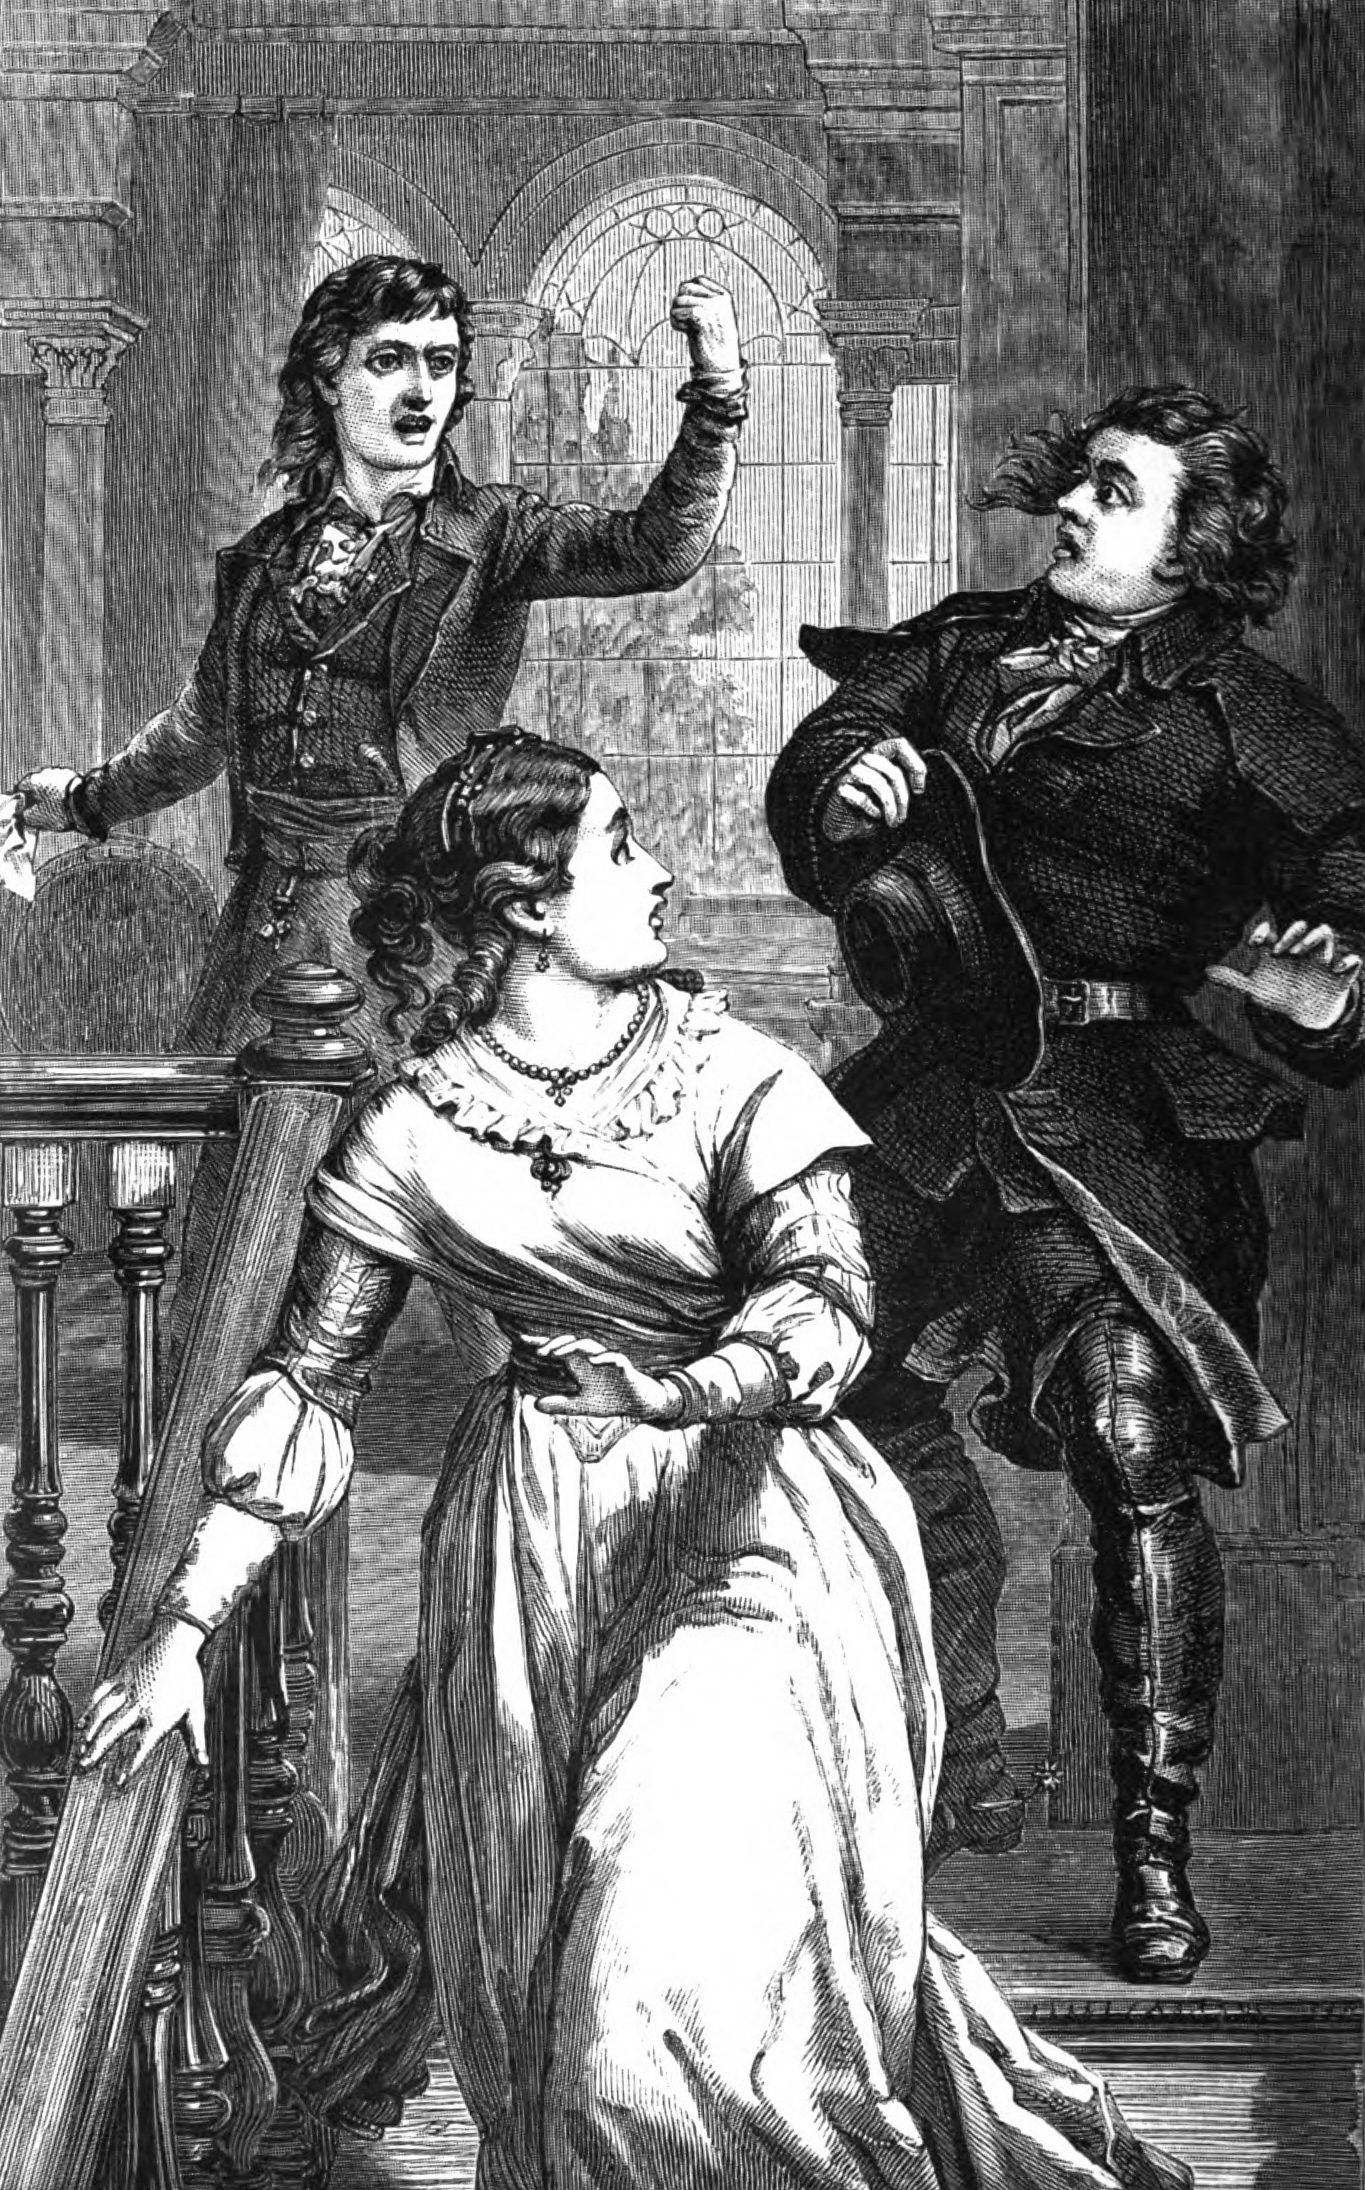 Image Description: Louis stands at the top of the stairs. He raises a fist in anger and holds a crumpled letter in his other hand. Antoine leans away from him with a terrified expression on his face. Pauline flees down the stairs and glances back at Antoine. End Description